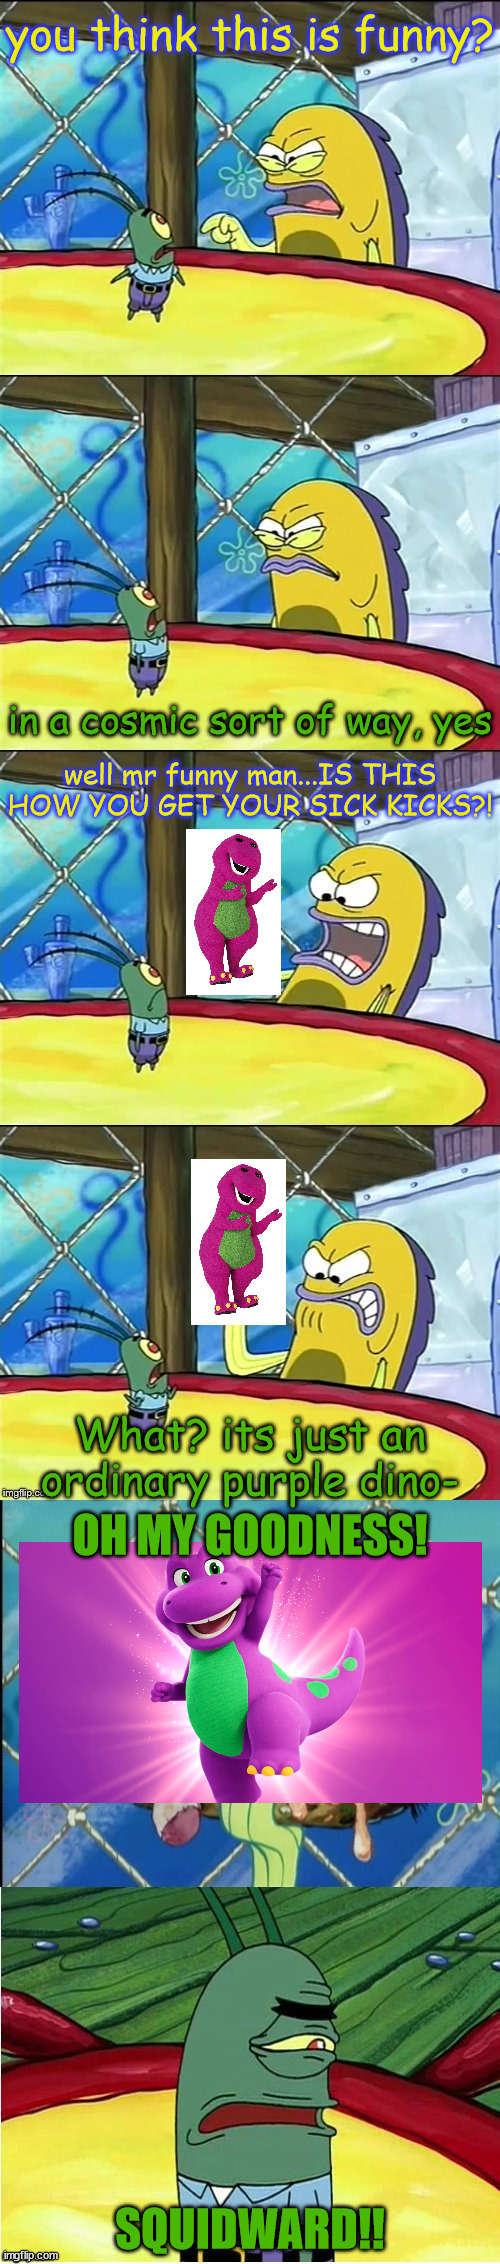 my childhood is ruined... | you think this is funny? in a cosmic sort of way, yes; well mr funny man...IS THIS HOW YOU GET YOUR SICK KICKS?! What? its just an ordinary purple dino-; OH MY GOODNESS! SQUIDWARD!! | image tagged in oh my goodness,barney the dinosaur | made w/ Imgflip meme maker